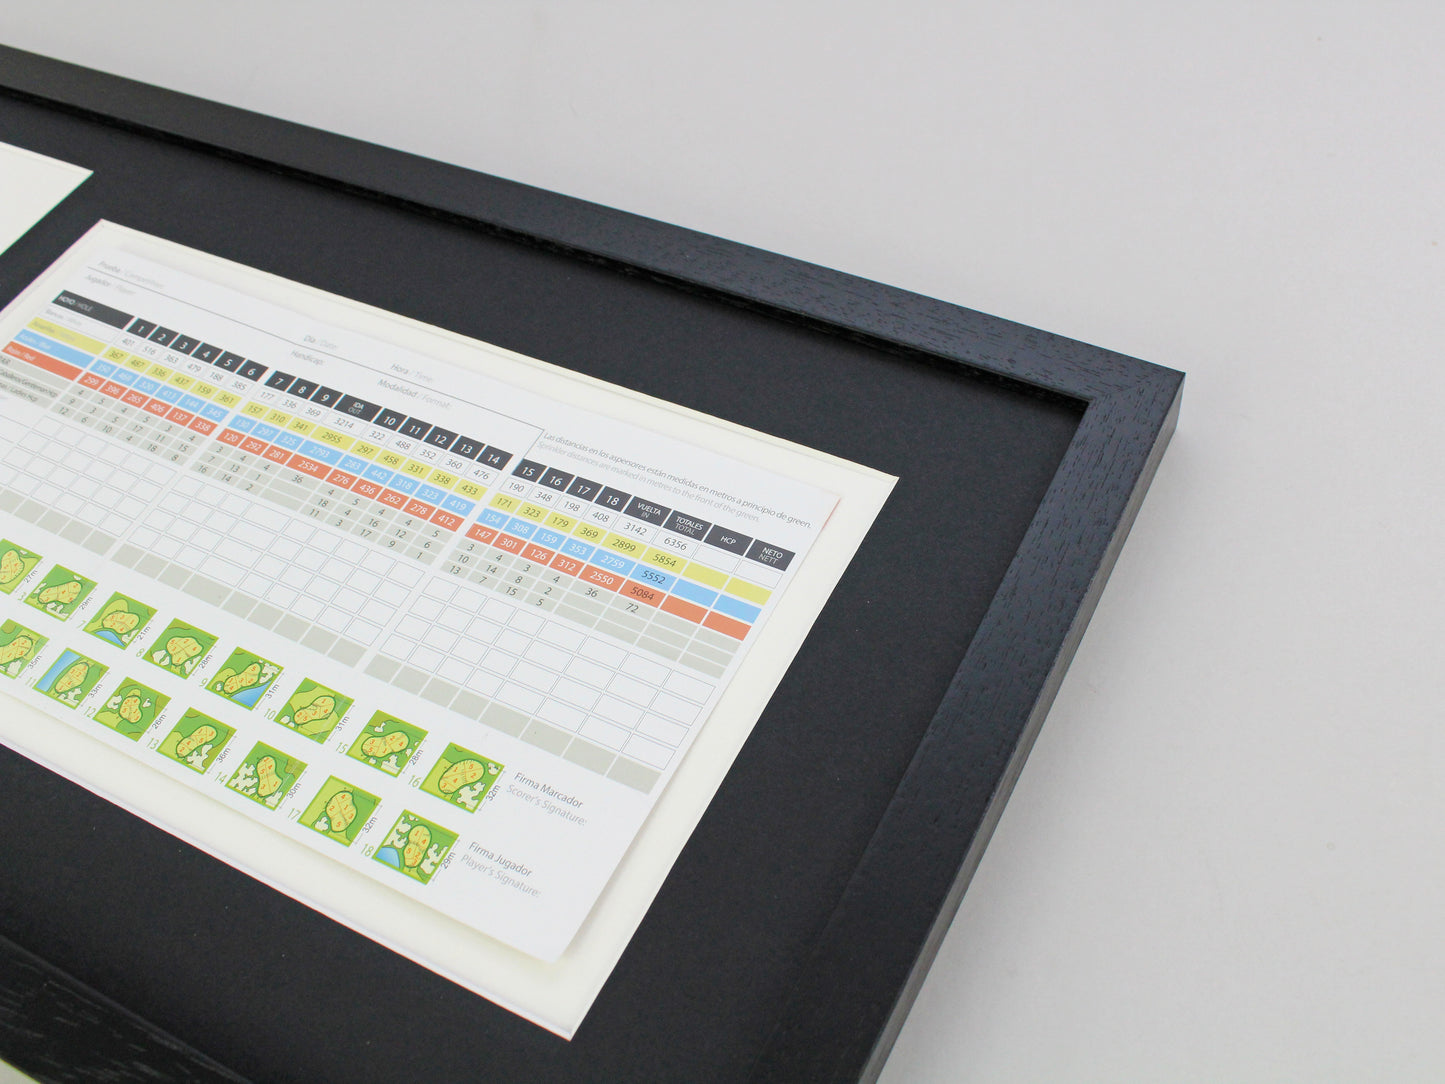 Golf Score Card Display Frame, With 6x4" Photo. 25x50cm Frame | Score Card sizes can vary - Check your size before purchase.